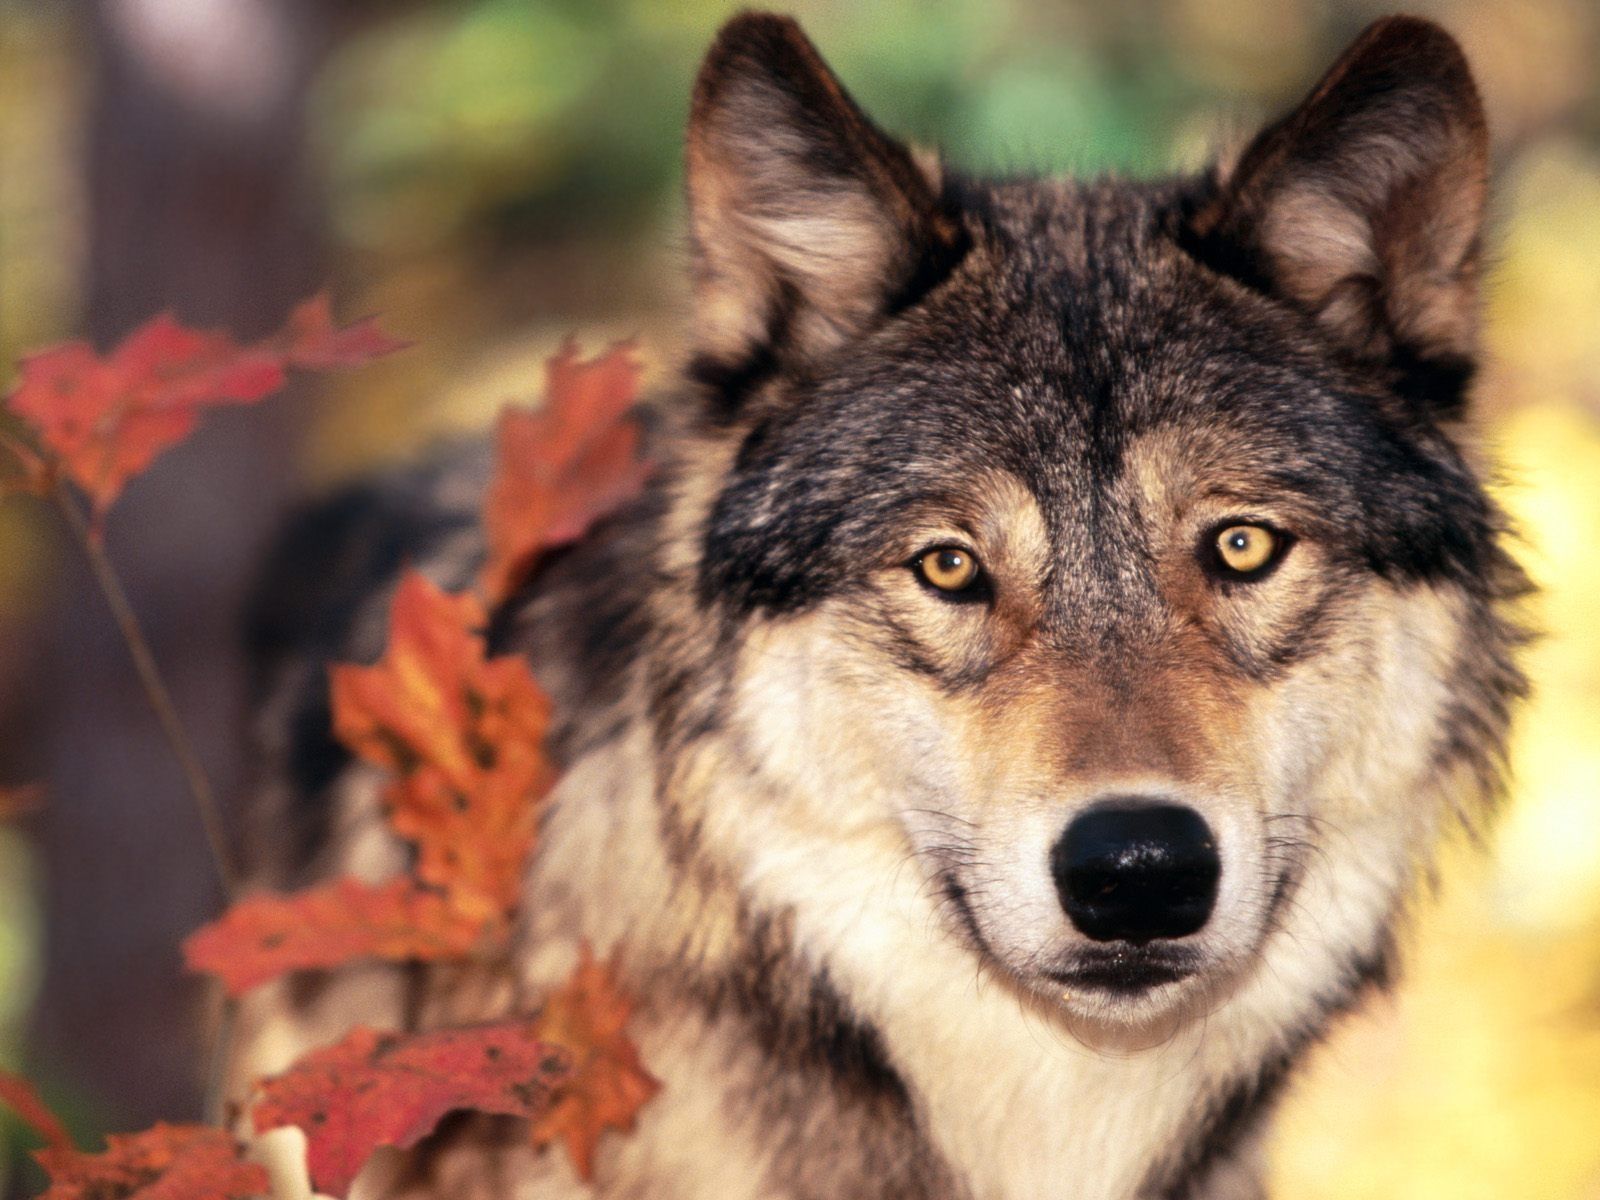 Wolf and Autumn Colors Wallpaper Wolves Animals Wallpaper in jpg format for free download